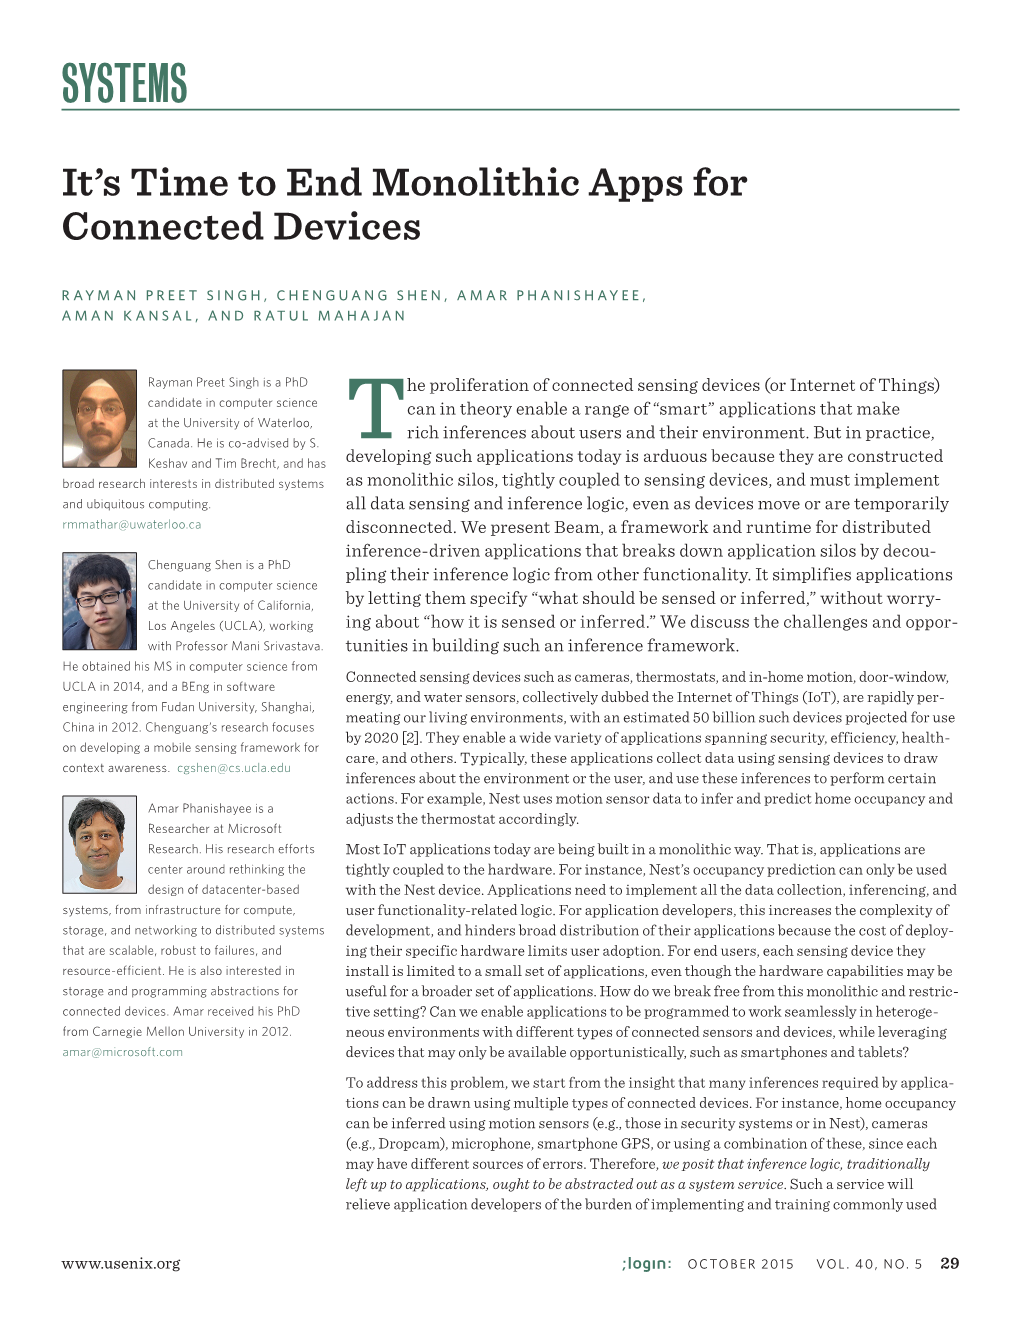 It's Time to End Monolithic Apps for Connected Devices